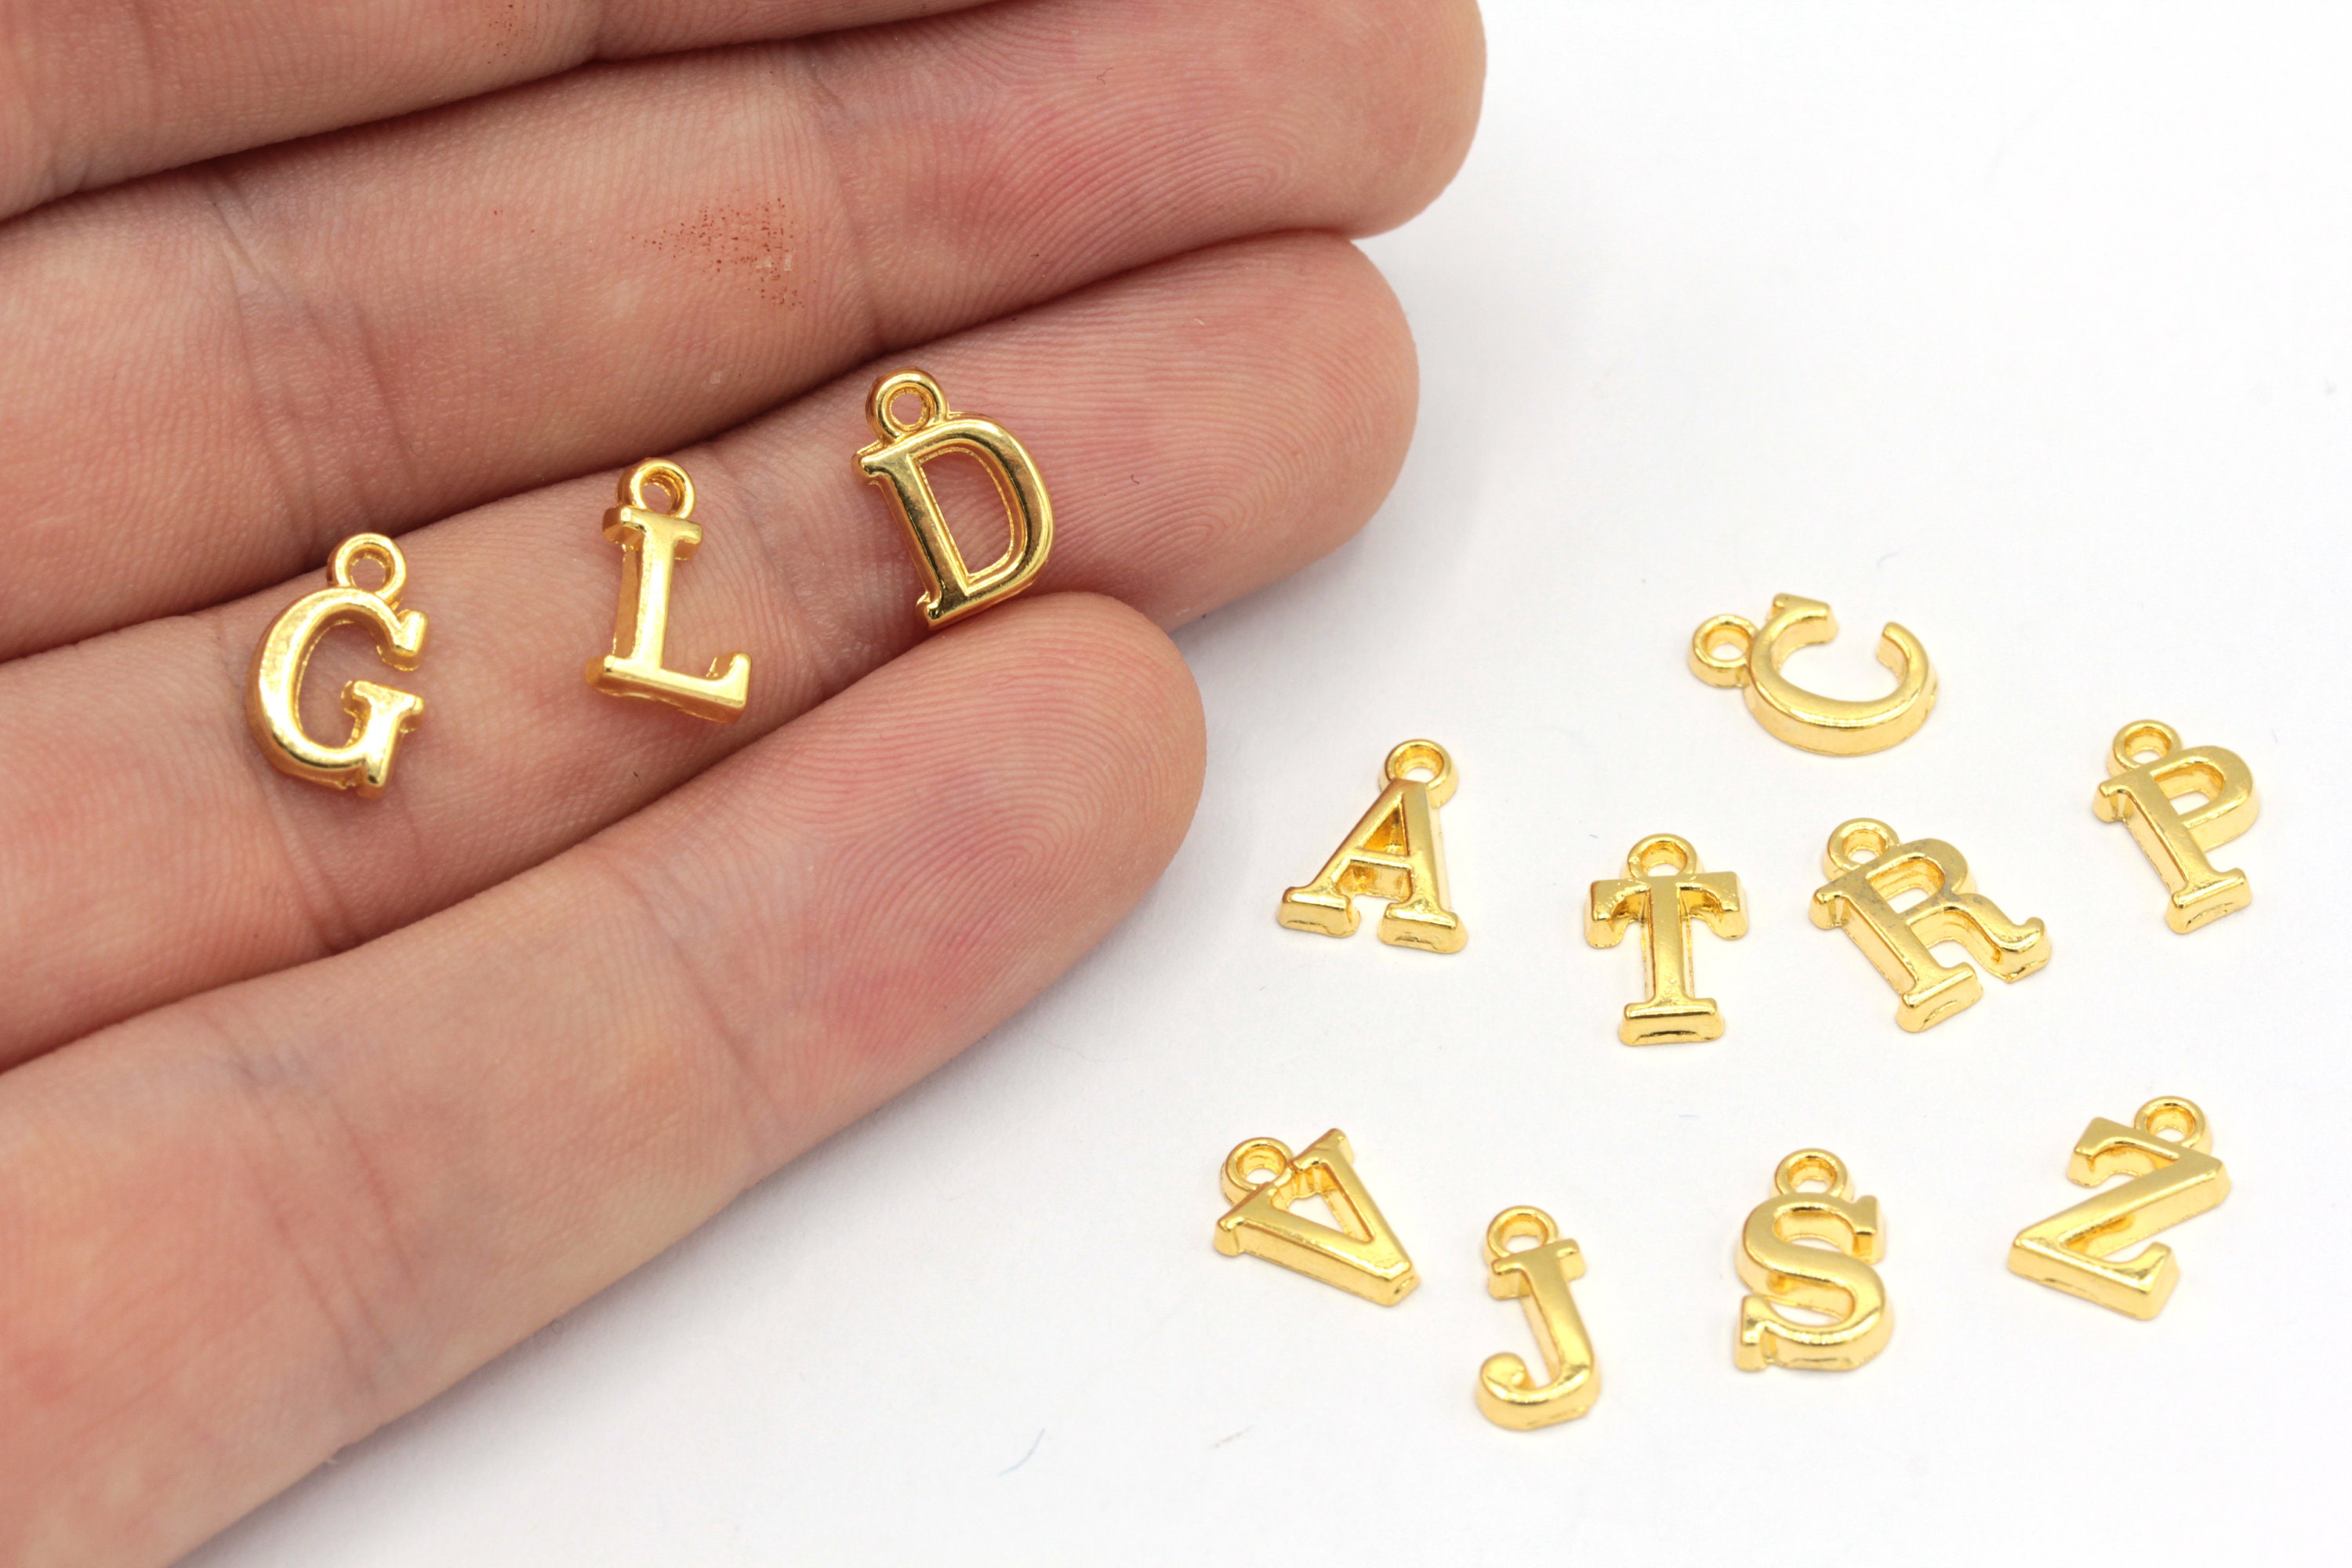 14k Gold Letter Forte Beads, 13mm, Gold Plated Letter Beads, Forte Gemstone  Bracelet, Gold Letter Beads, Beads for Jewelry Making 